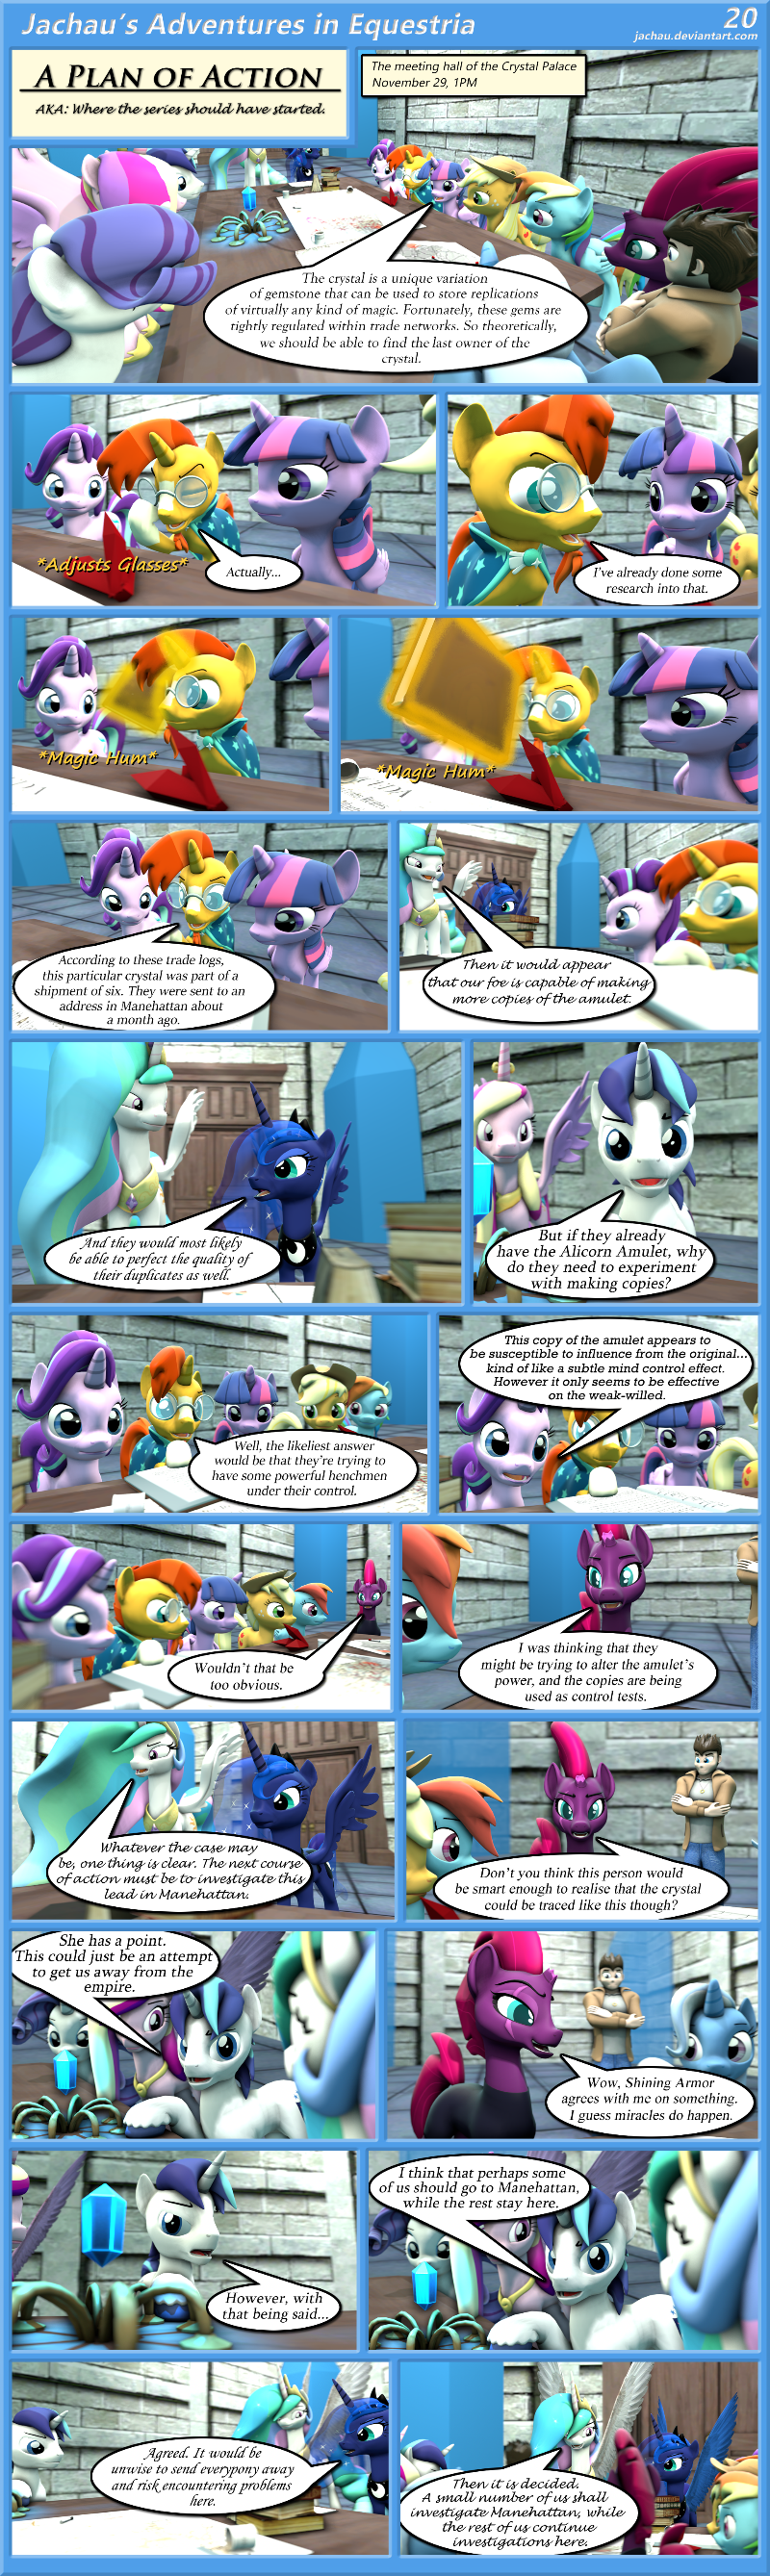 Page 20: A Plan of Action